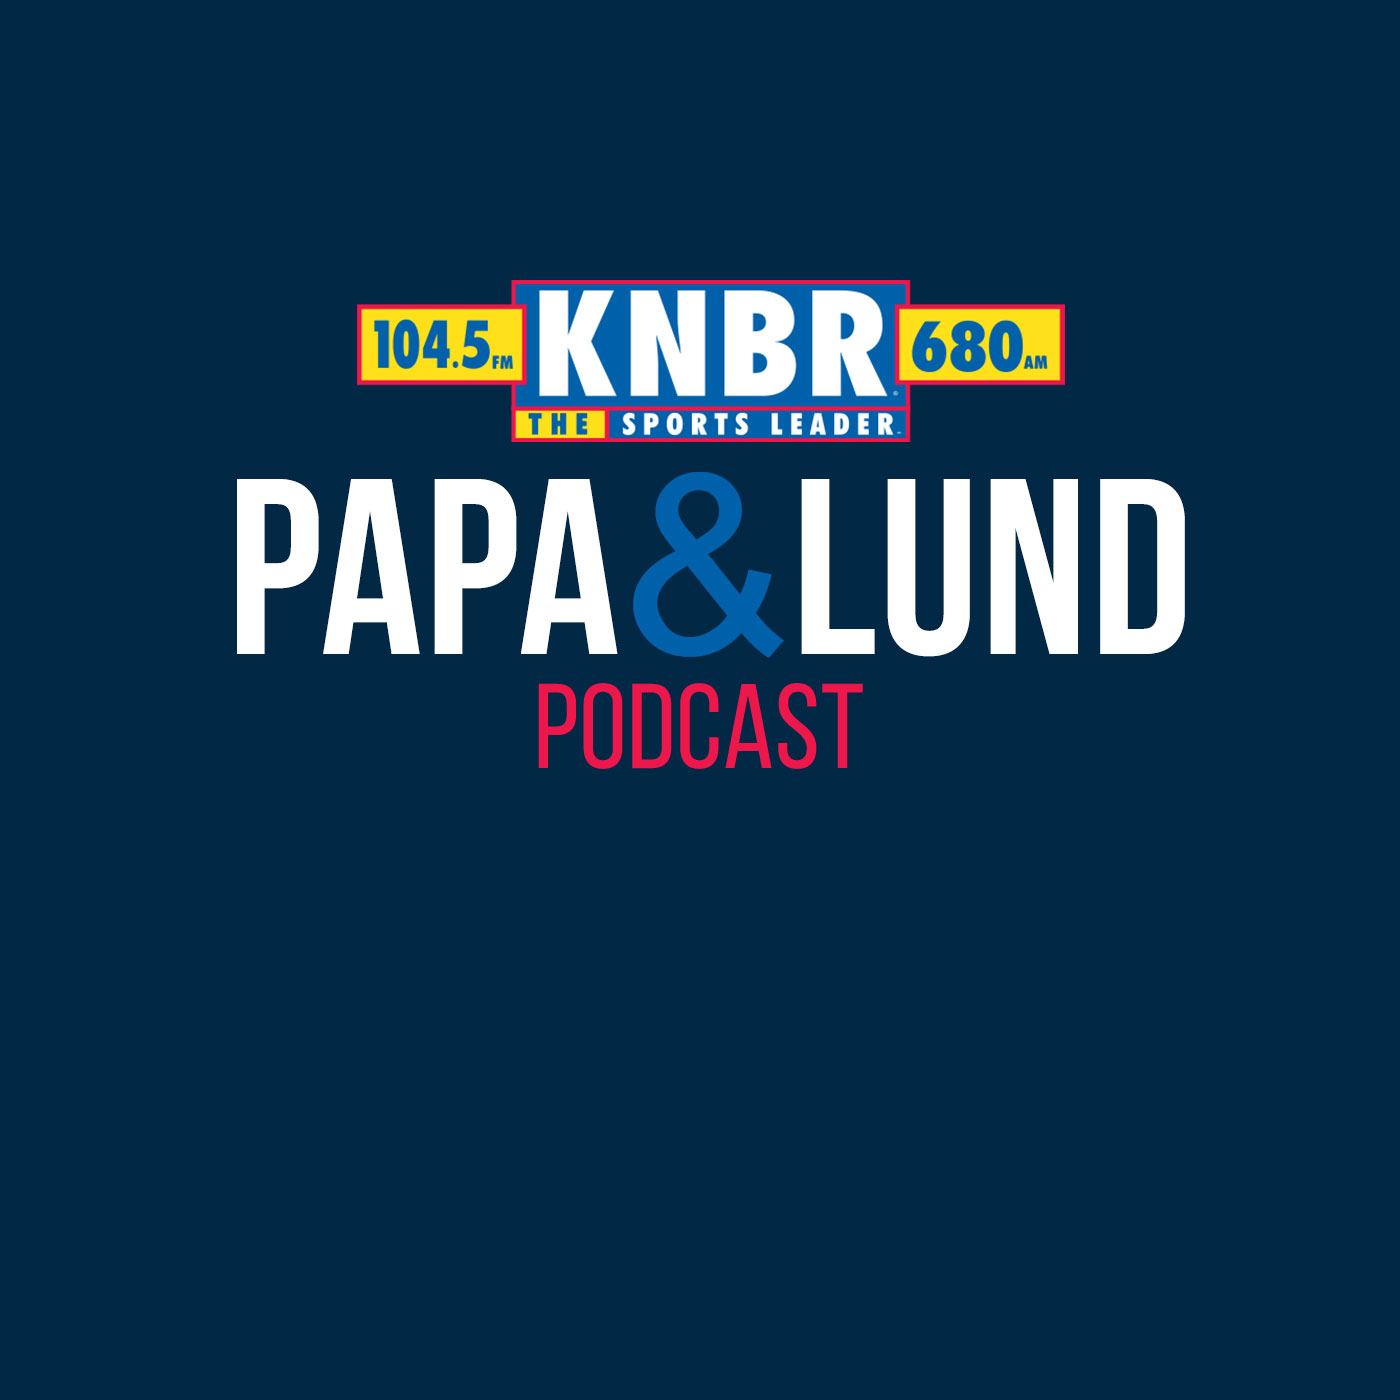 4-26 Andrew Siciliano joins Papa & Lund to break down the 1st RD of the NFL Draft and whether or not there is a shift in philosophy in the NFL, with not many defensive players being selected